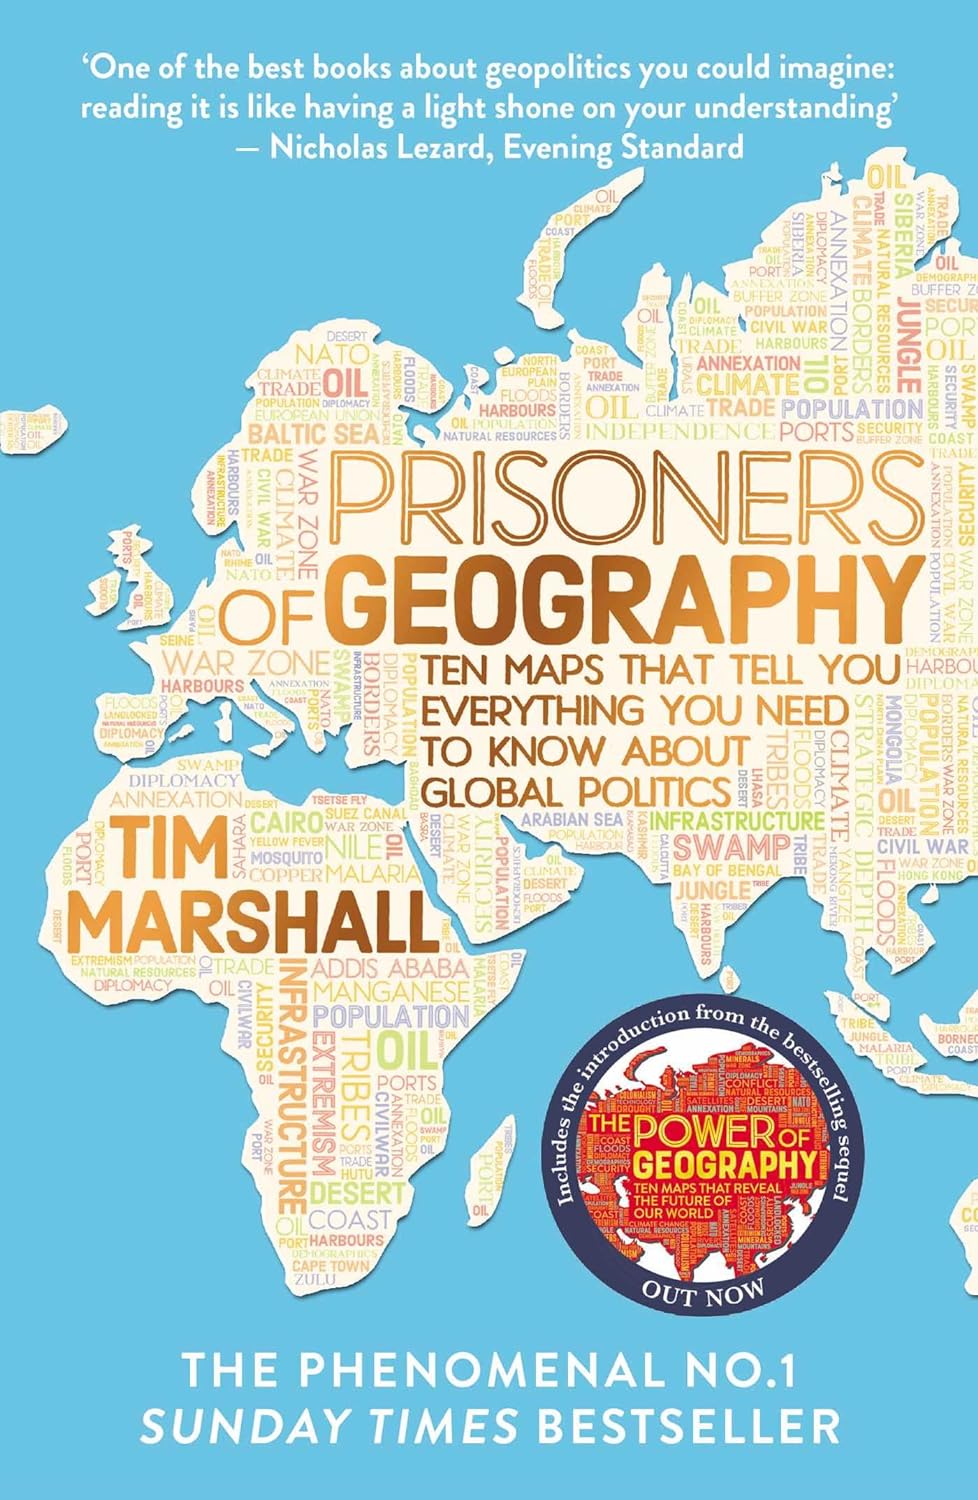 PRISONERS OF GEOGRAPHY: TEN MAPS THAT TELL YOU EVERYTHING YOU NEED TO KNOW ABOUT GLOBAL POLITICS